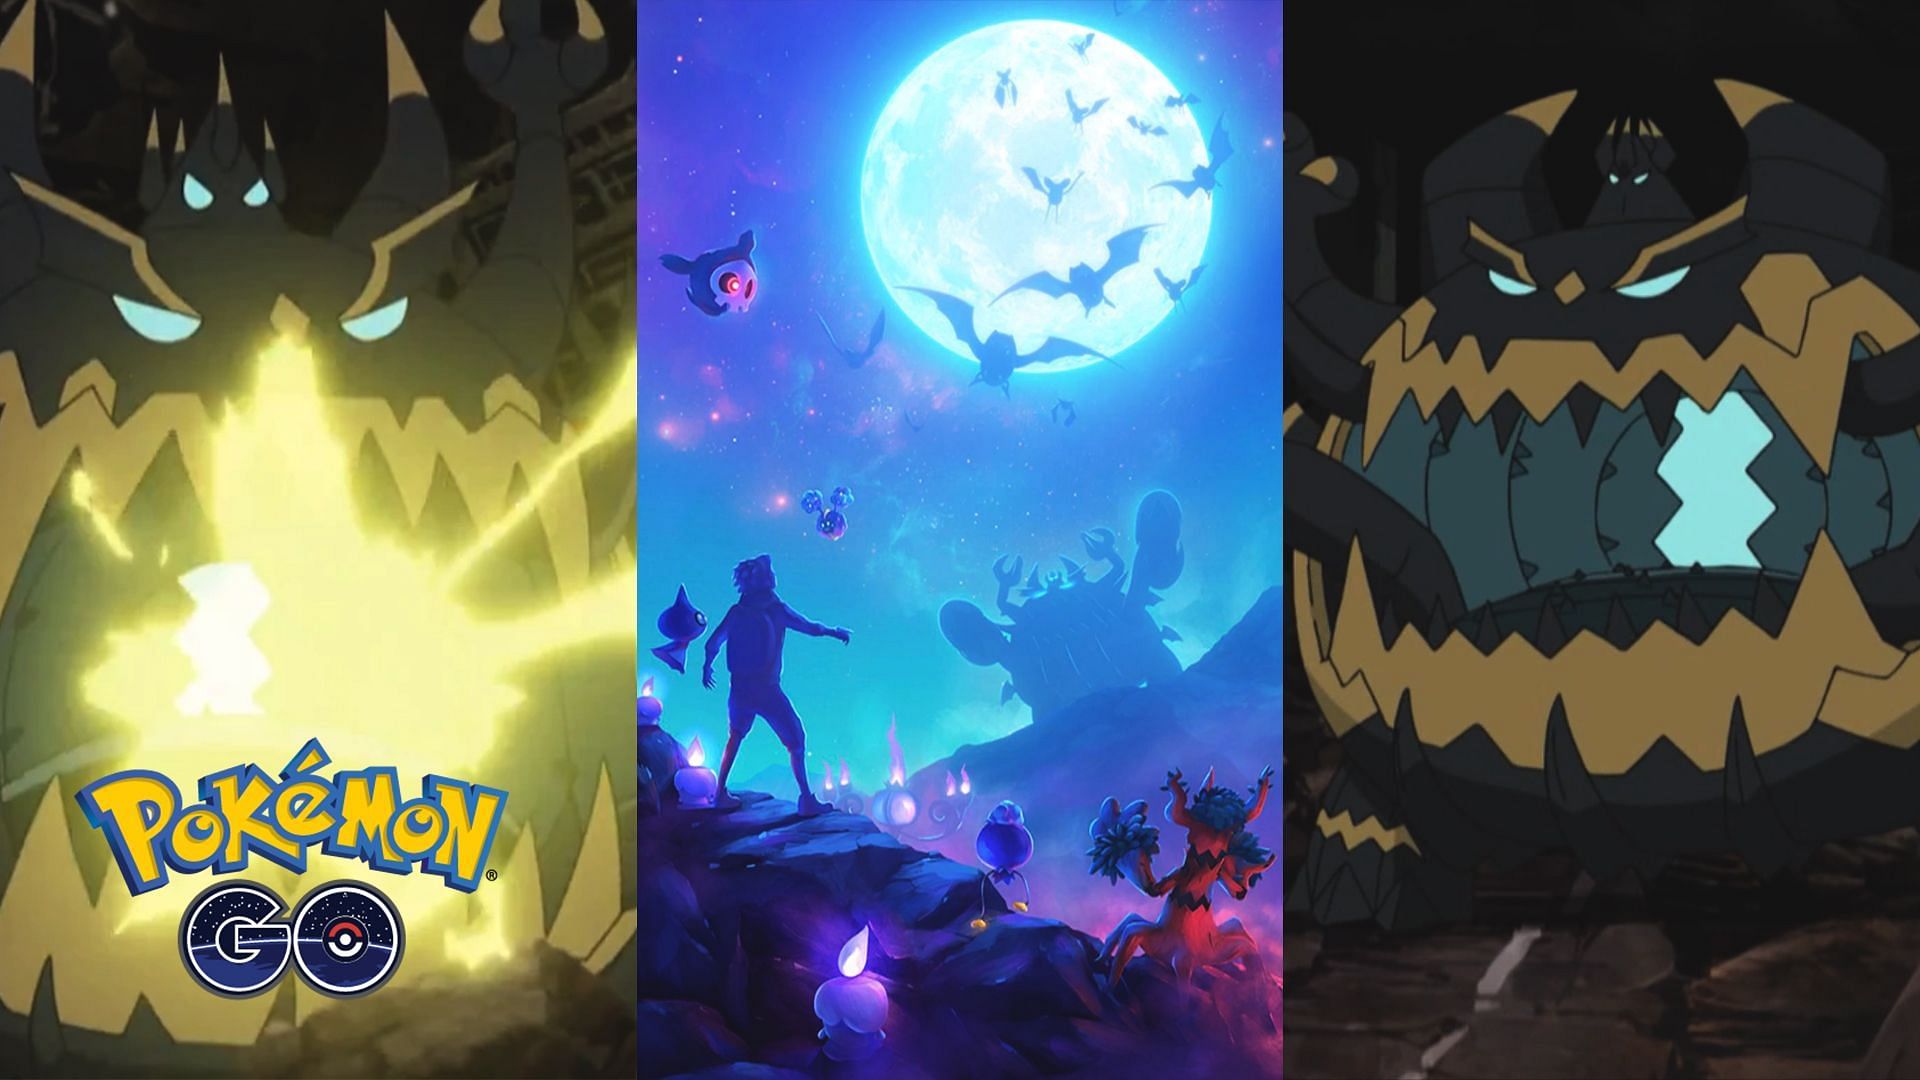 Pokemon GO Guzzlord coming this September